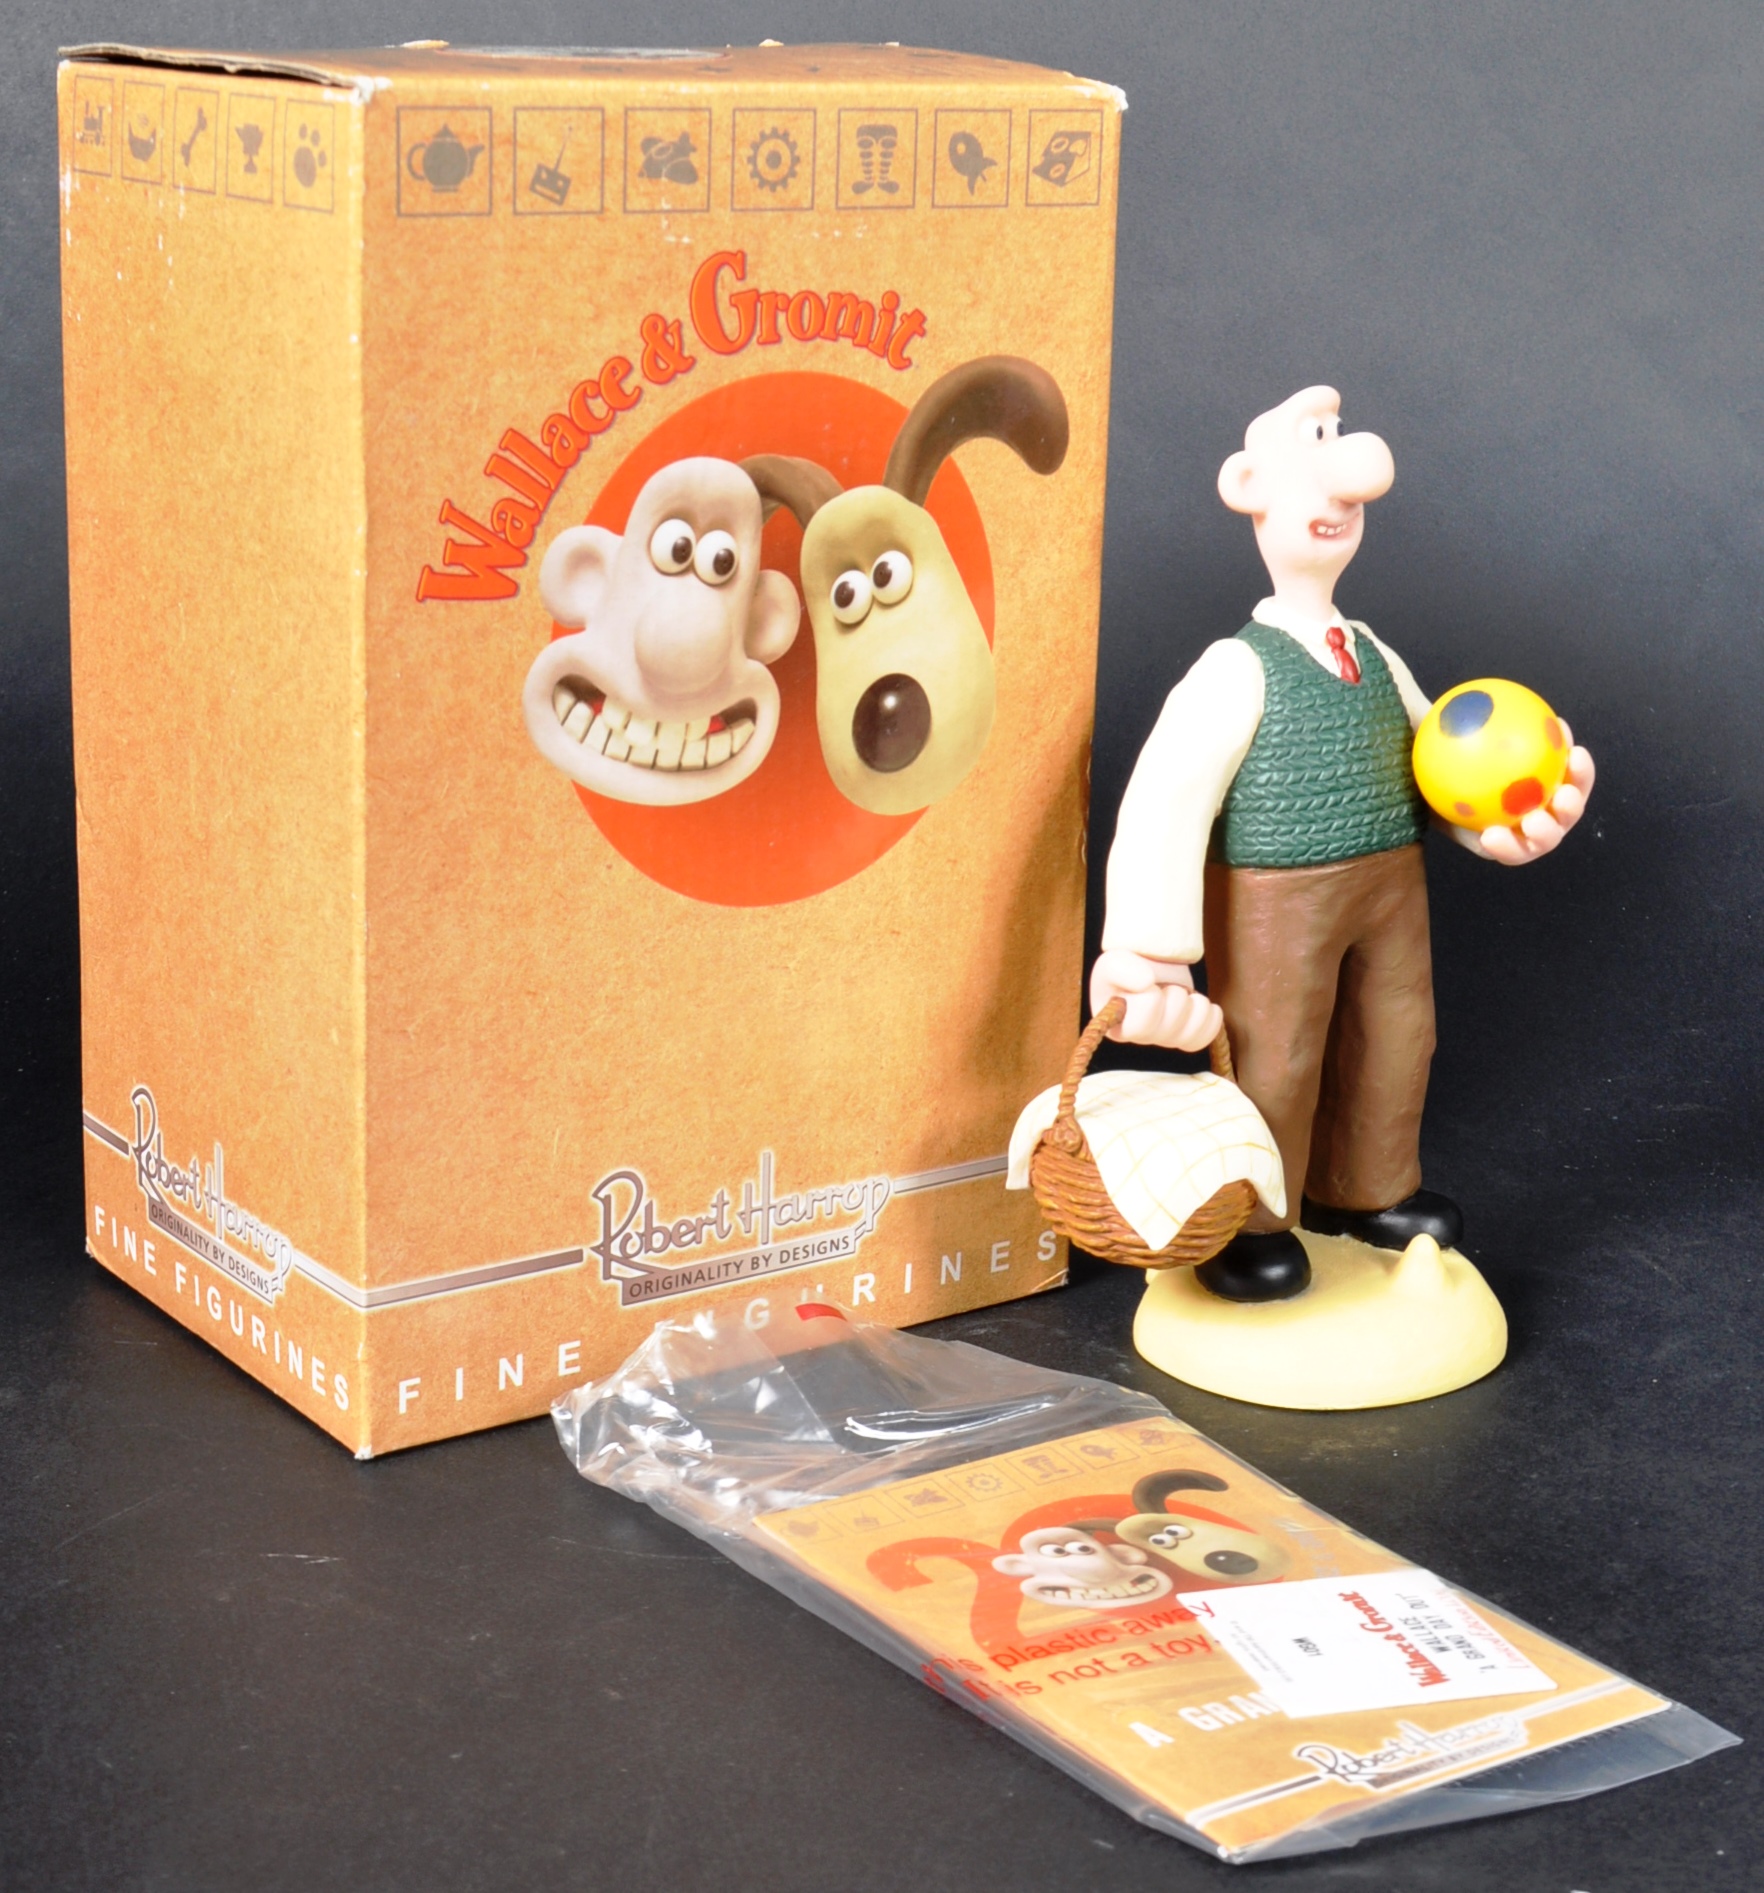 WALLACE & GROMIT - ROBERT HARROP - SIGNED LIMITED EDITION FIGURINE - Image 2 of 10